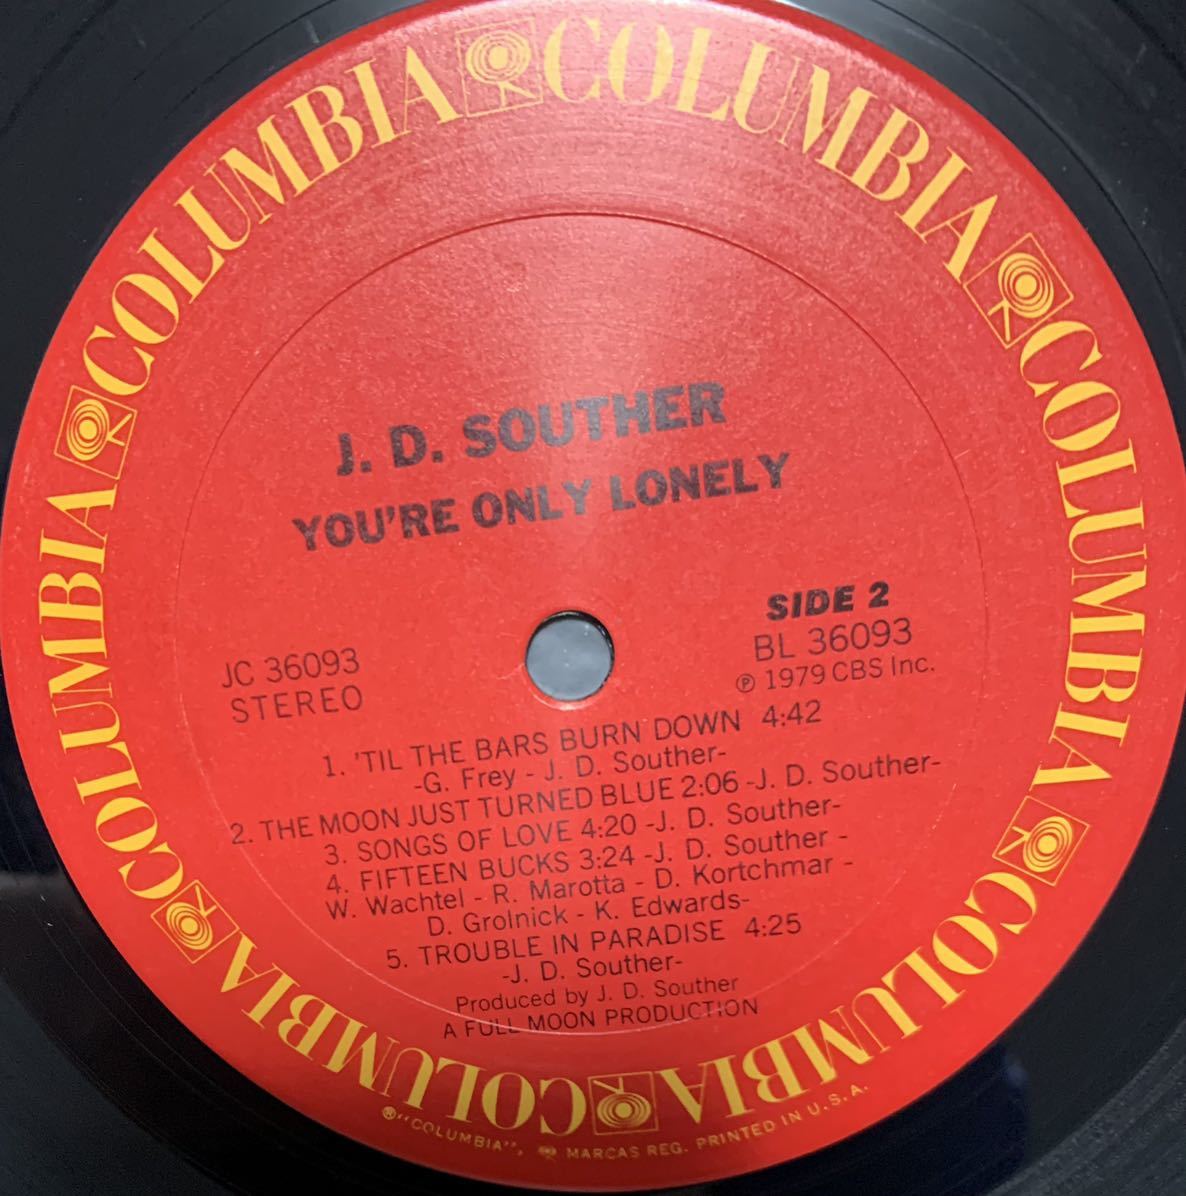 ★LP/US/J.D. Souther/You're Only Lonely/JC 36093/レコード_画像6